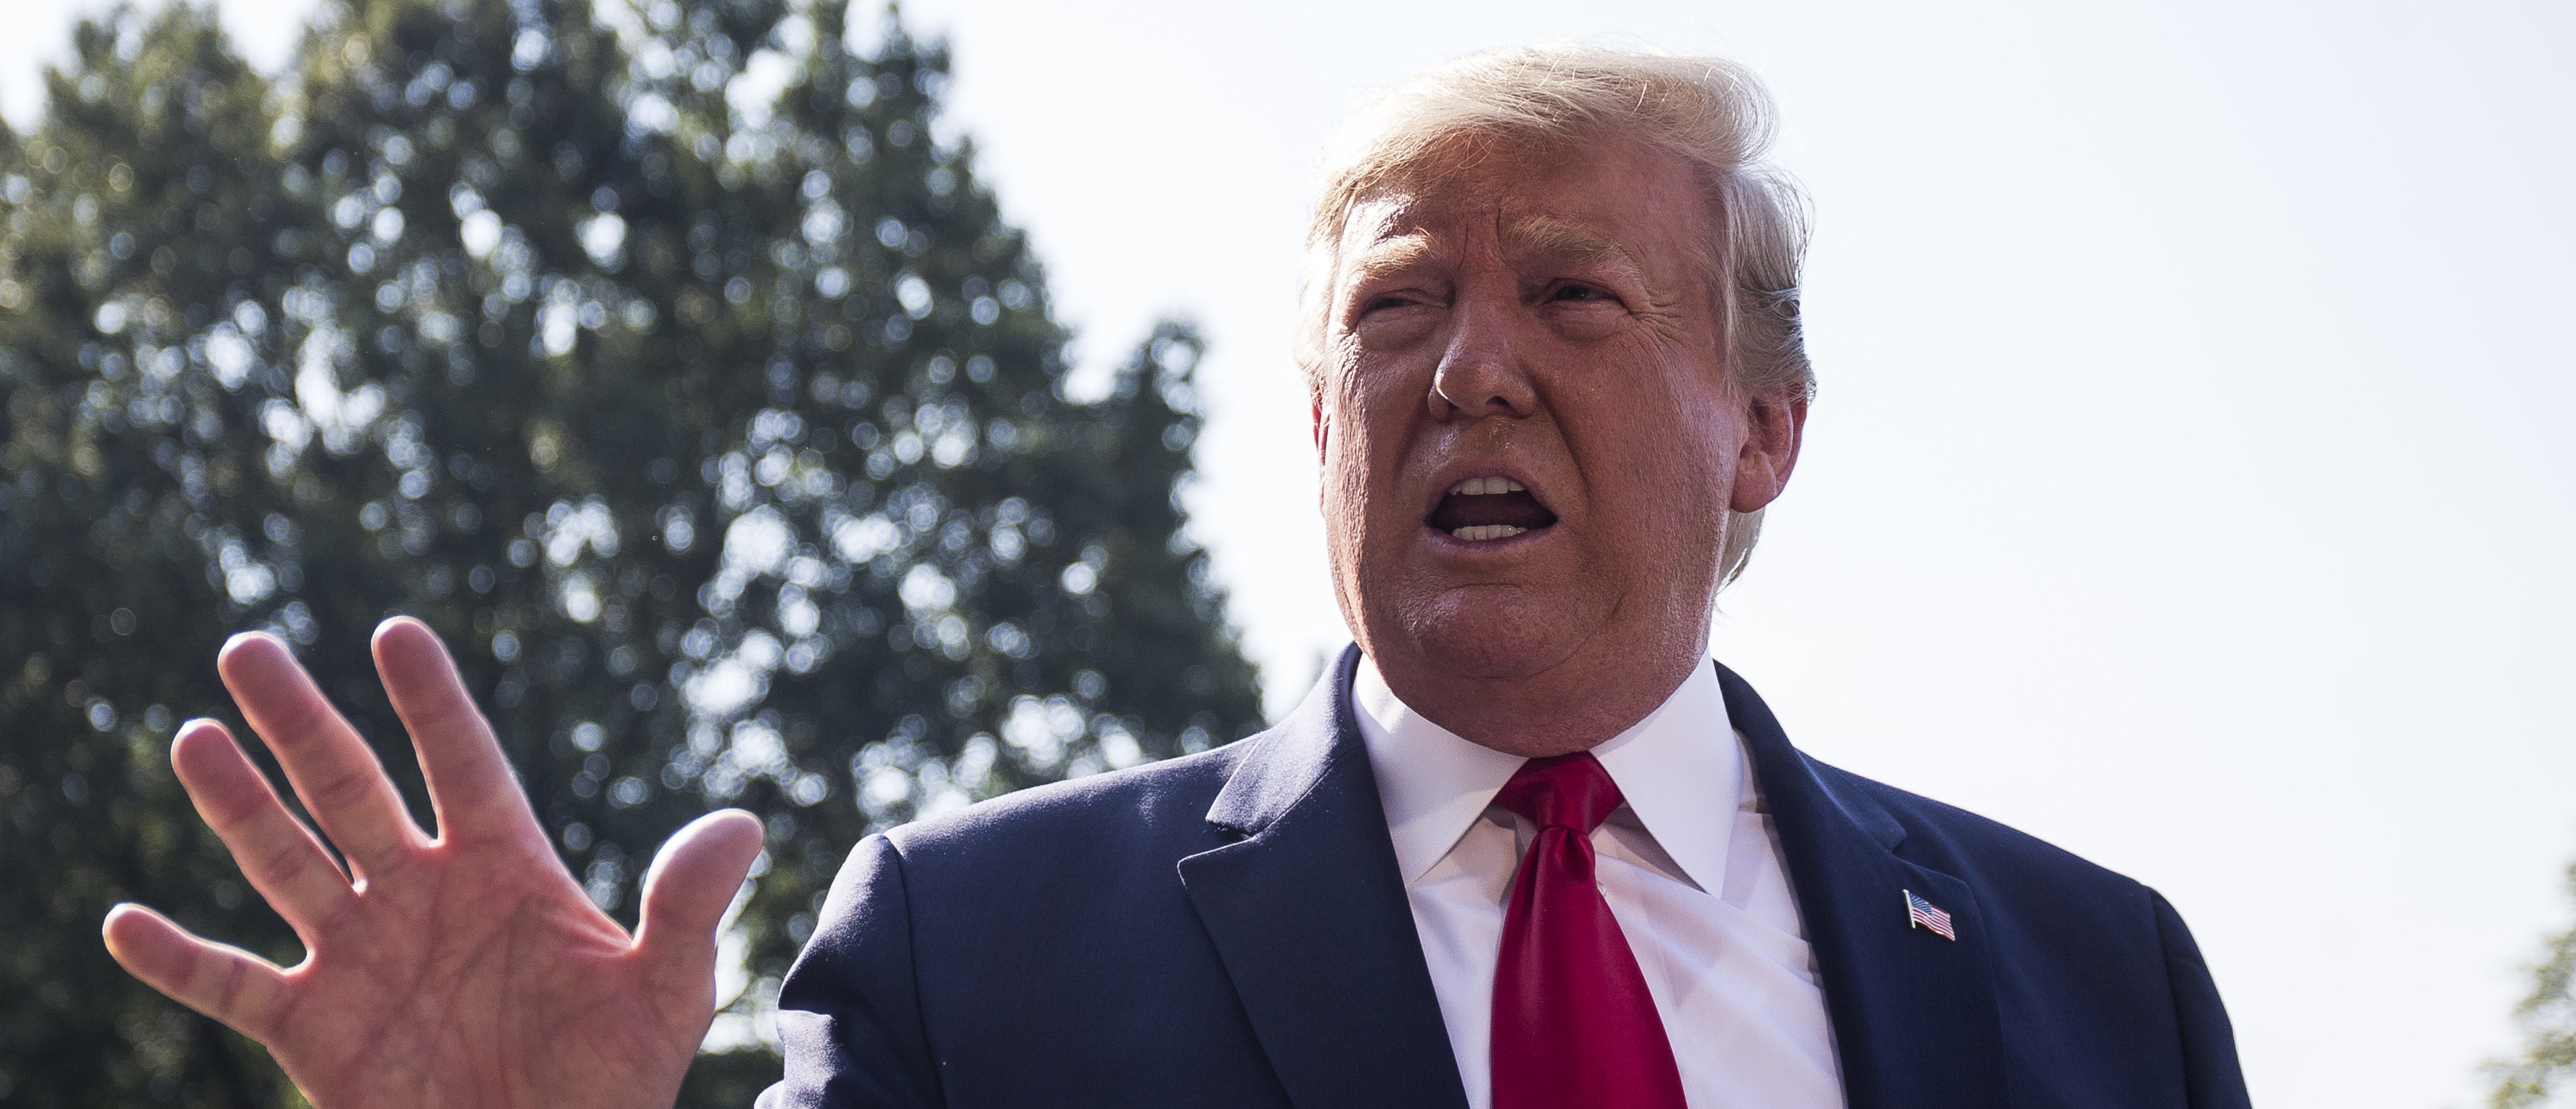 President Donald Trump speaks to members of the press before departing from the White House en route to Dayton, Ohio and El Paso, Texas on August 7, 2019. (Zach Gibson/Getty Images)